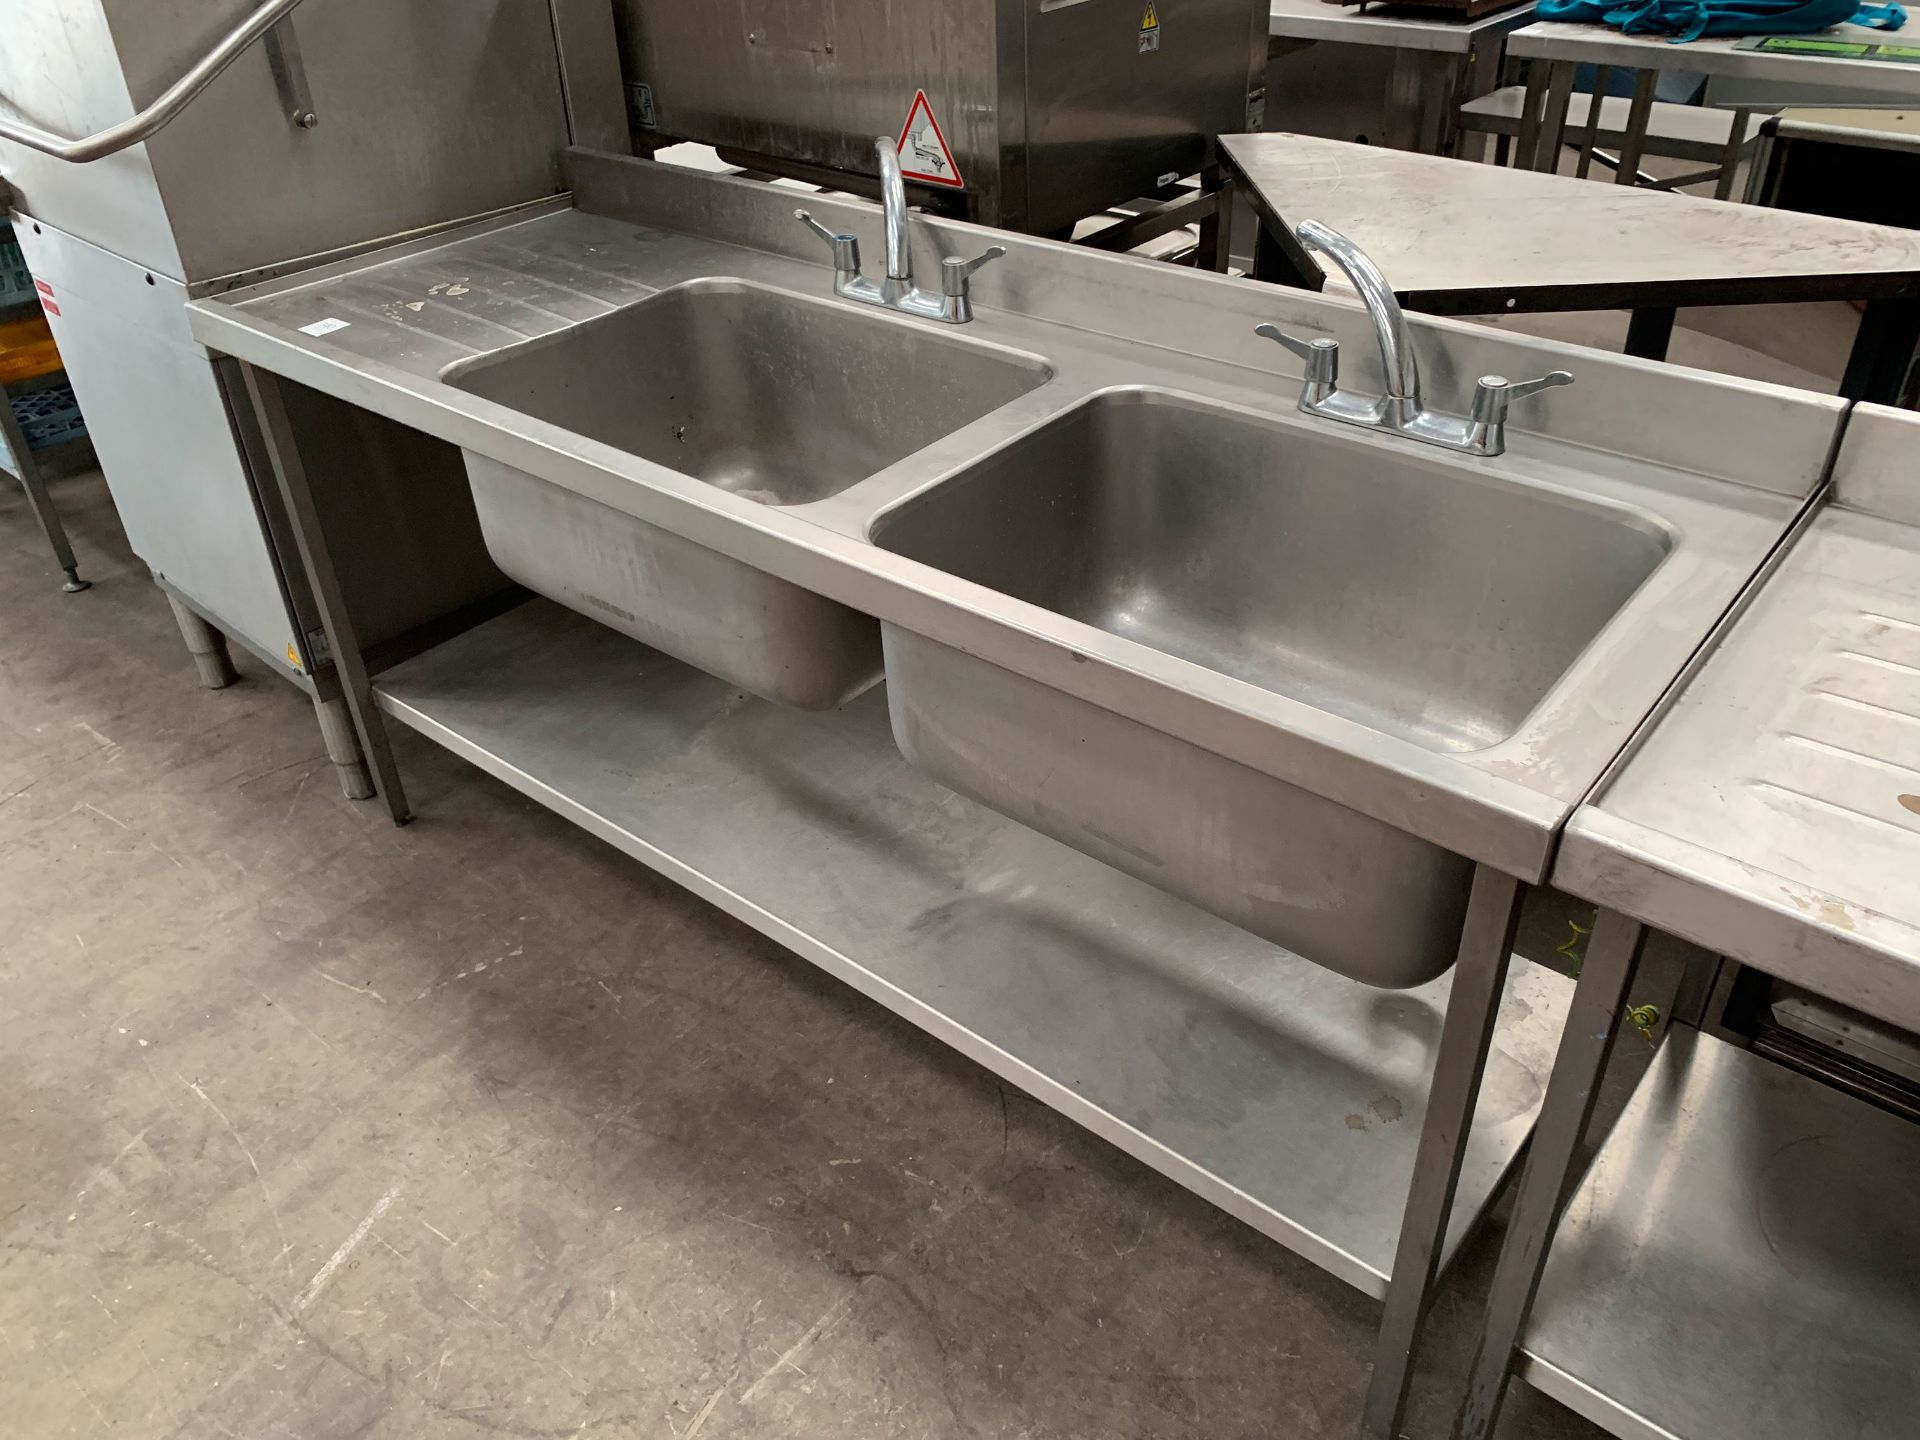 Large 2-tier Stainless Steel Double Sink Station with Splashback - Image 4 of 4